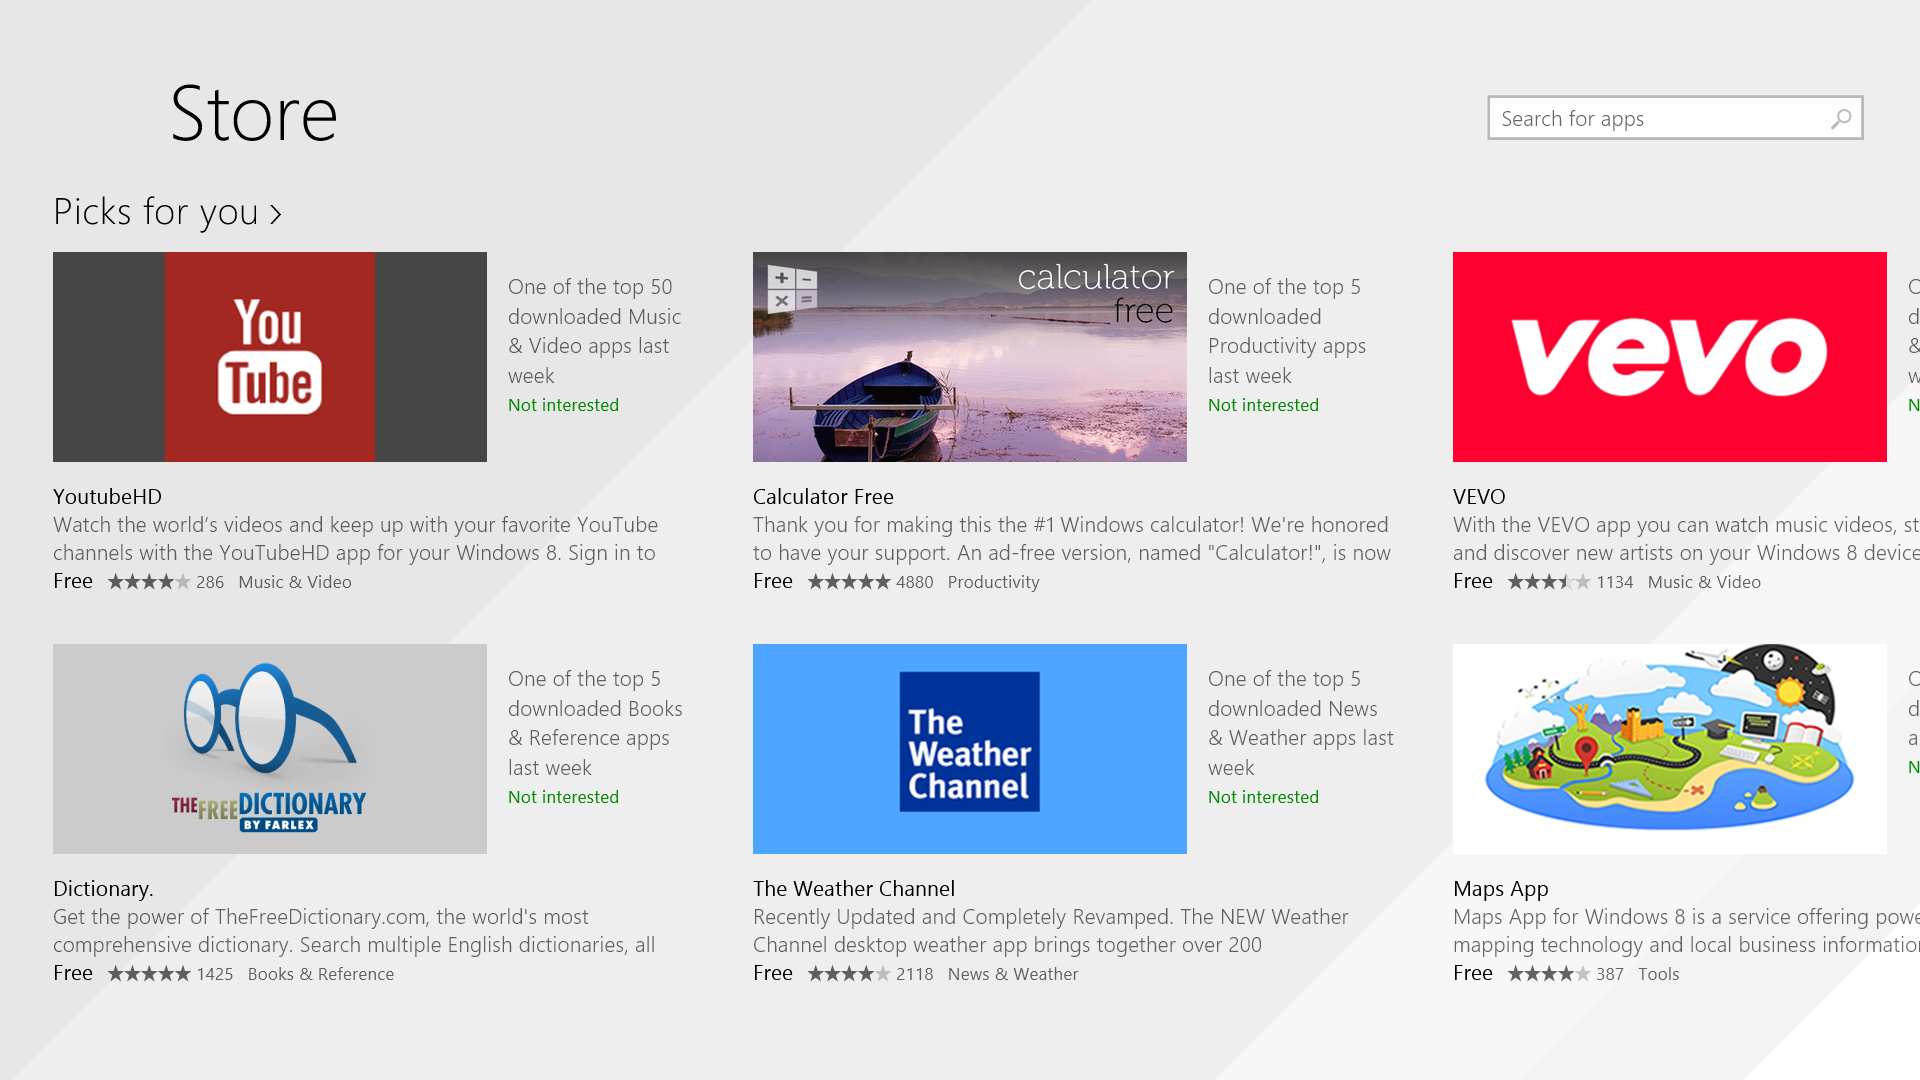 Windows 8.1 Review: Little Changes Make A Big Difference